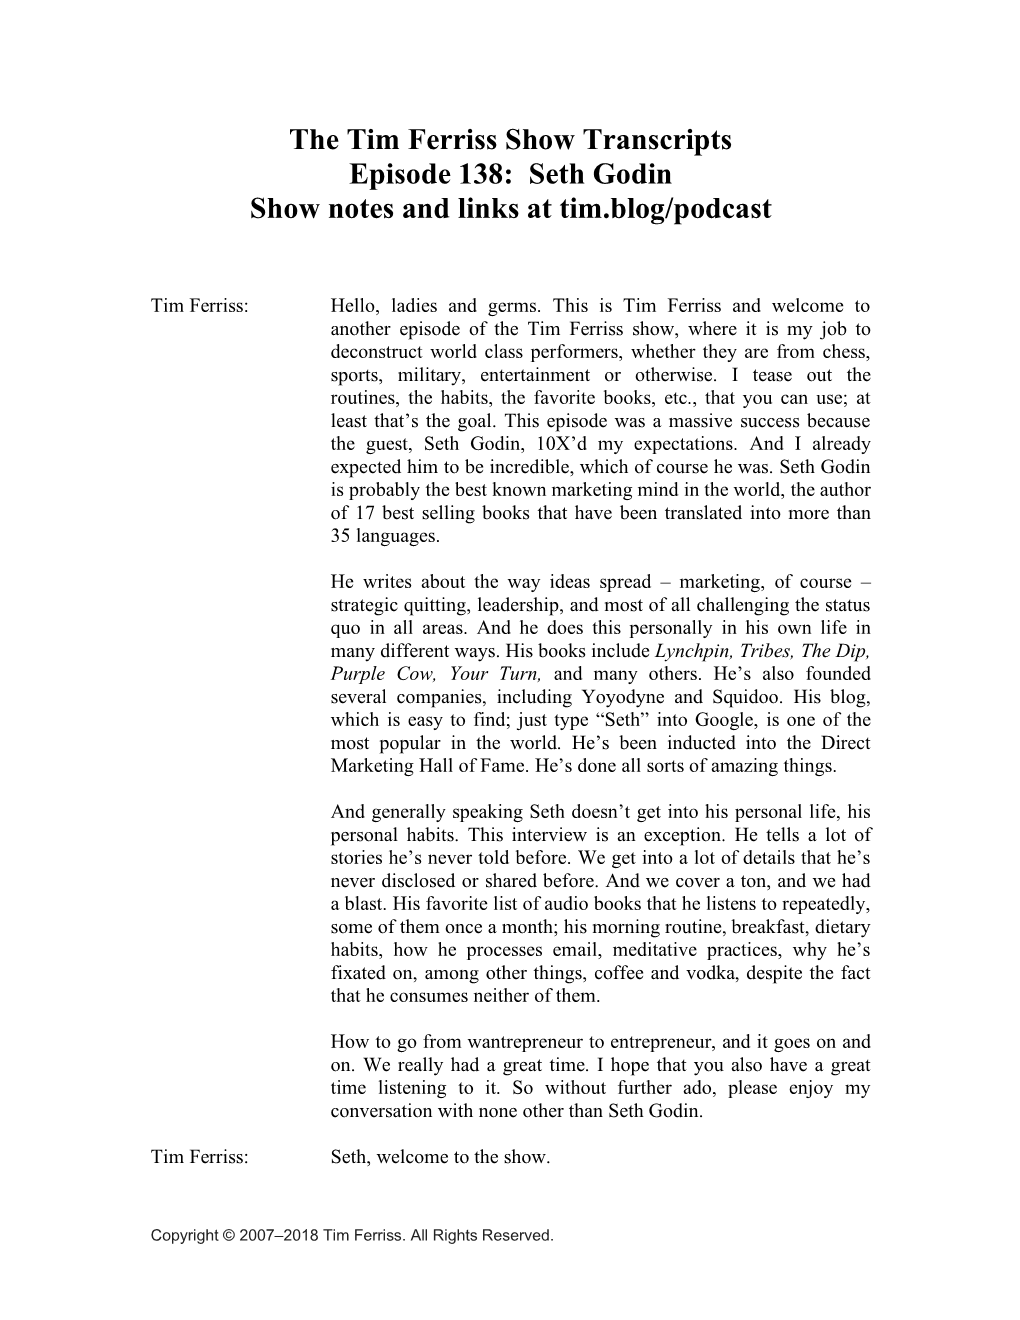 The Tim Ferriss Show Transcripts Episode 138: Seth Godin Show Notes and Links at Tim.Blog/Podcast